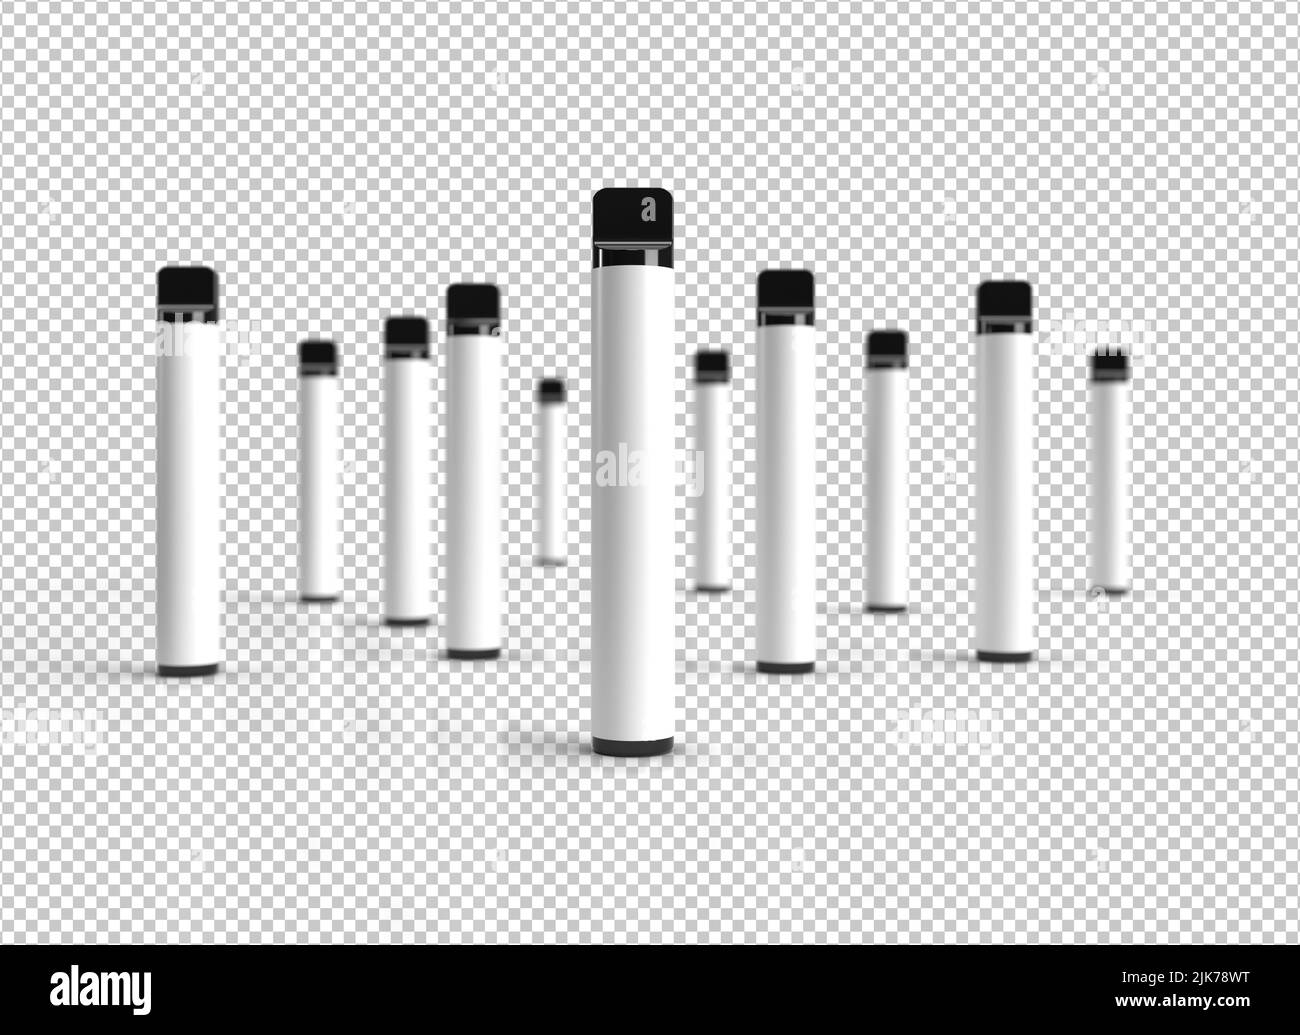 Disposable vape pen sticks scene isolated on a white background with white labels for copy space. 3D render illustration. Stock Photo